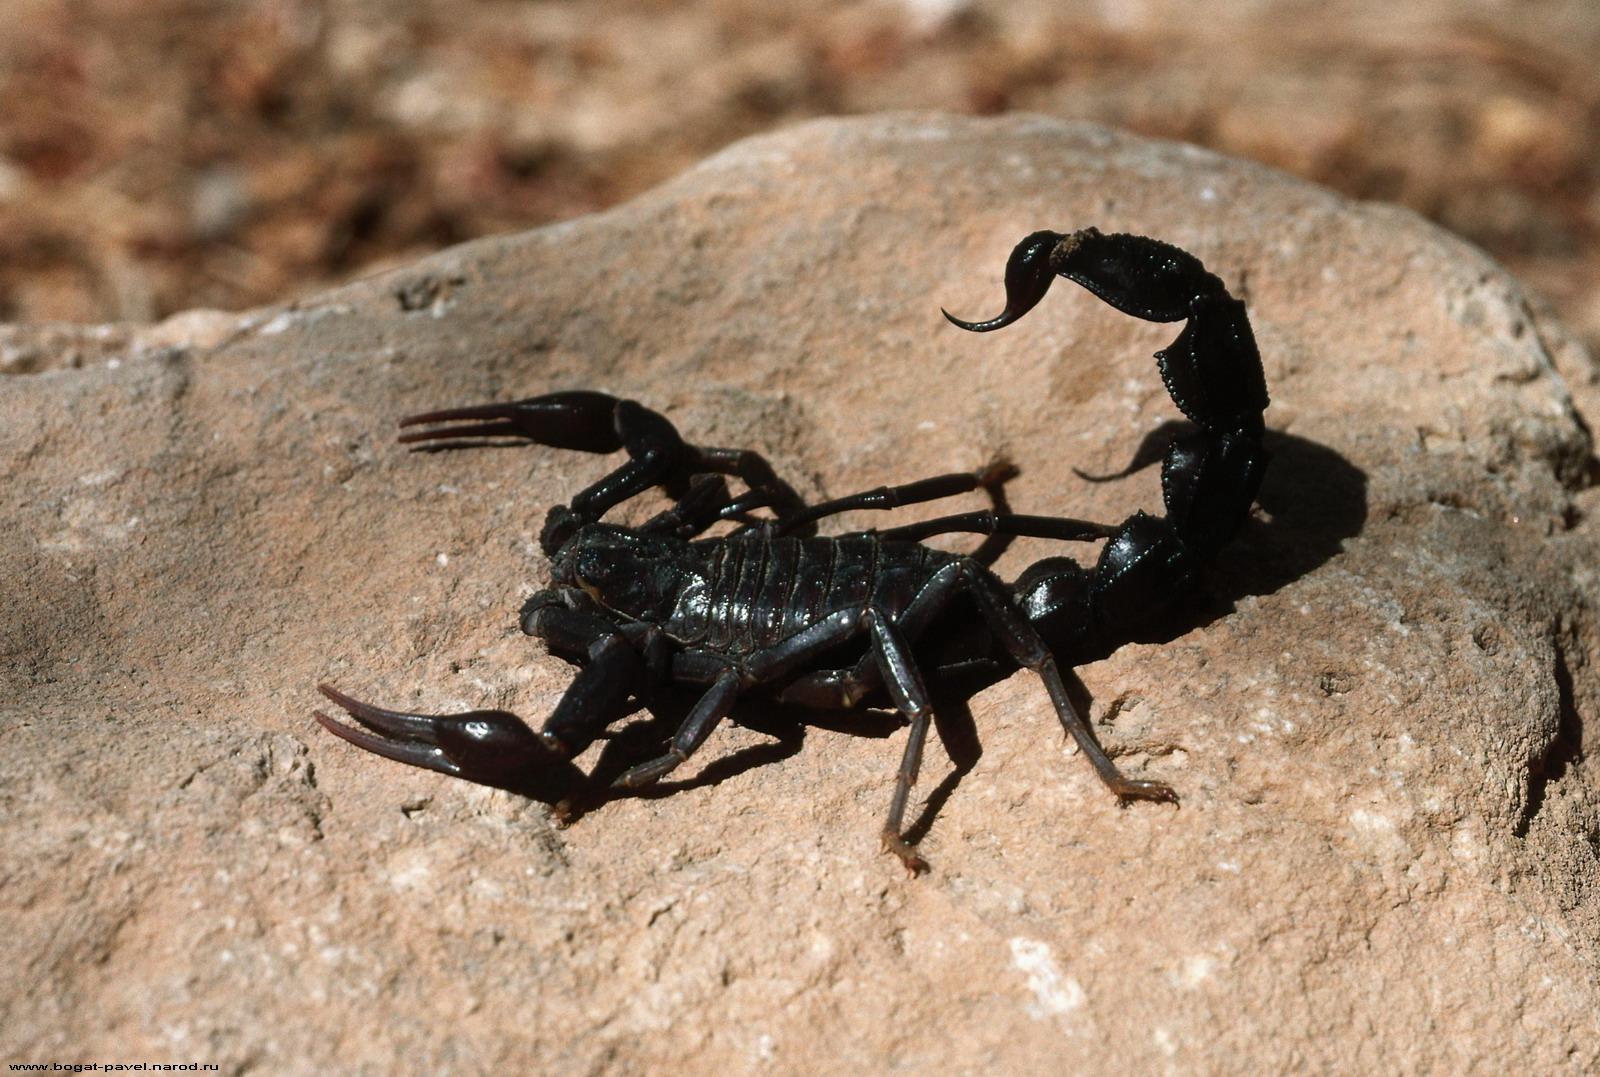 image Insects Scorpions Animals